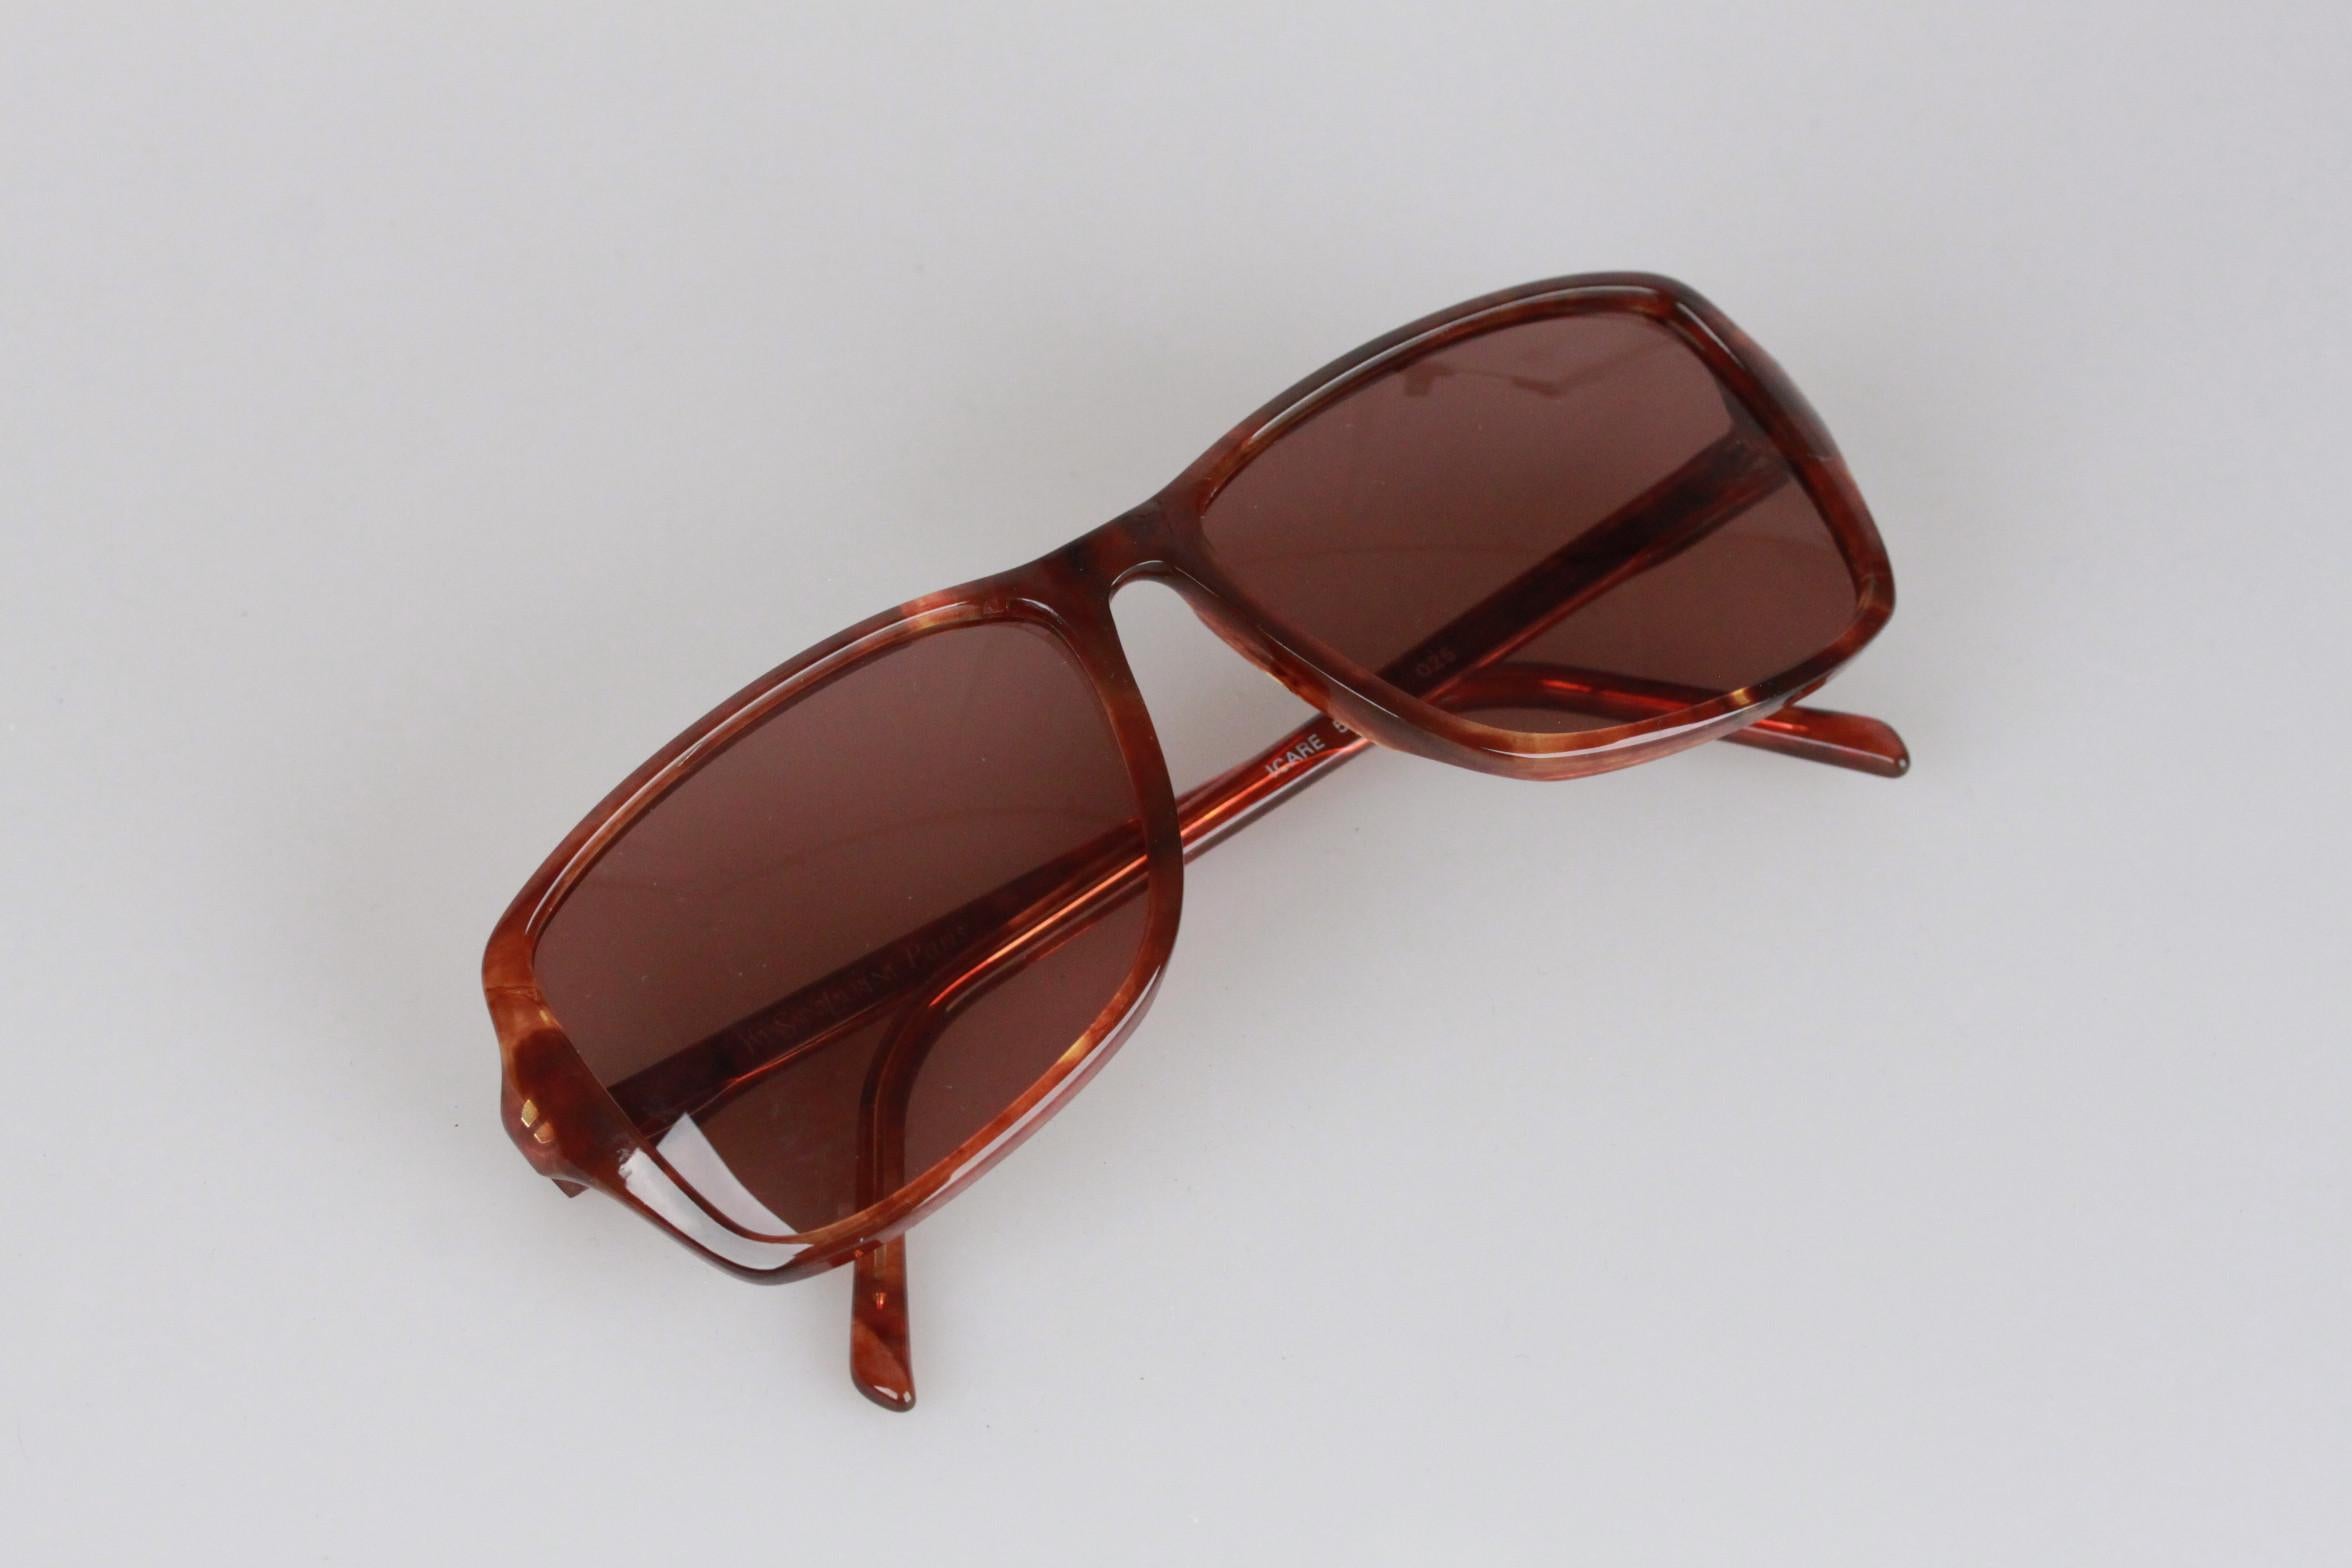 Yves Saint Laurent Vintage Brown Sunglasses Icare 59mm New Old Stock 1